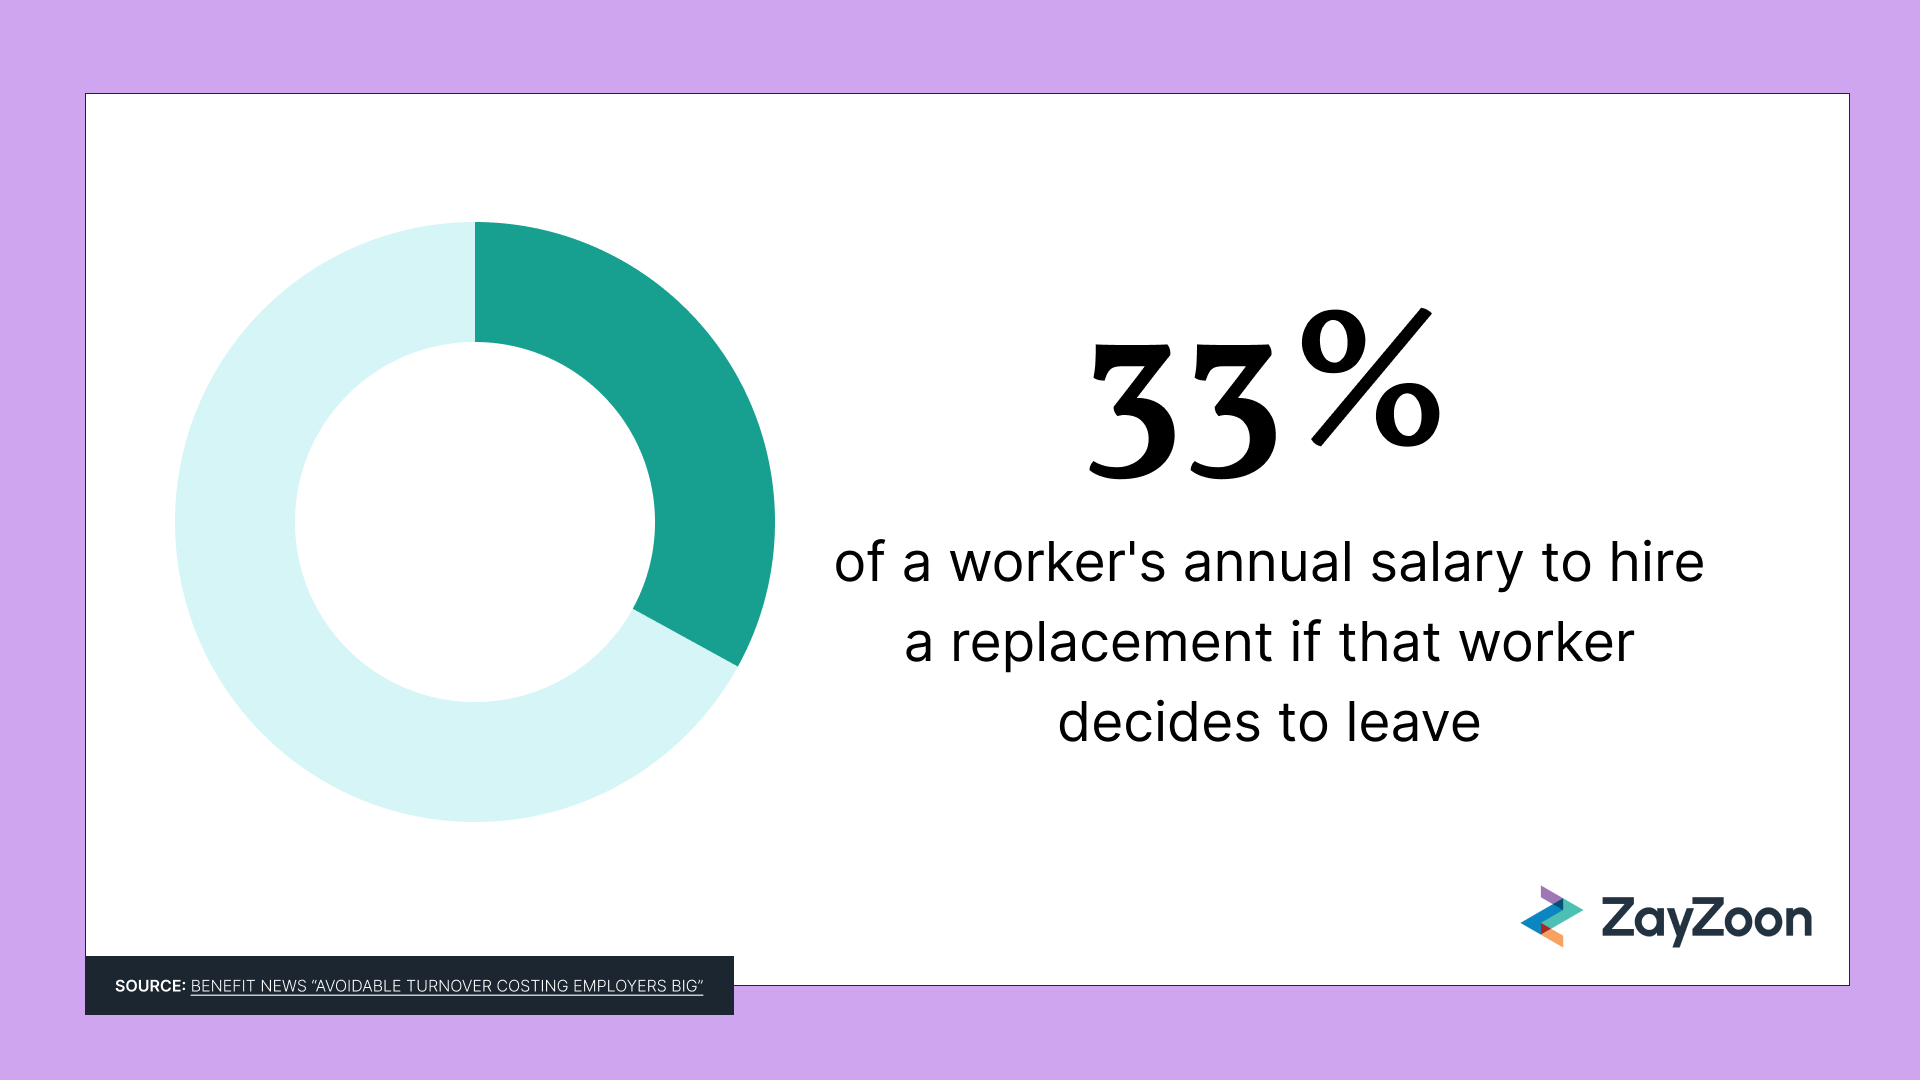 Pie chart depicting how it costs 33% of a worker's annual salary to hire a replacement worker.